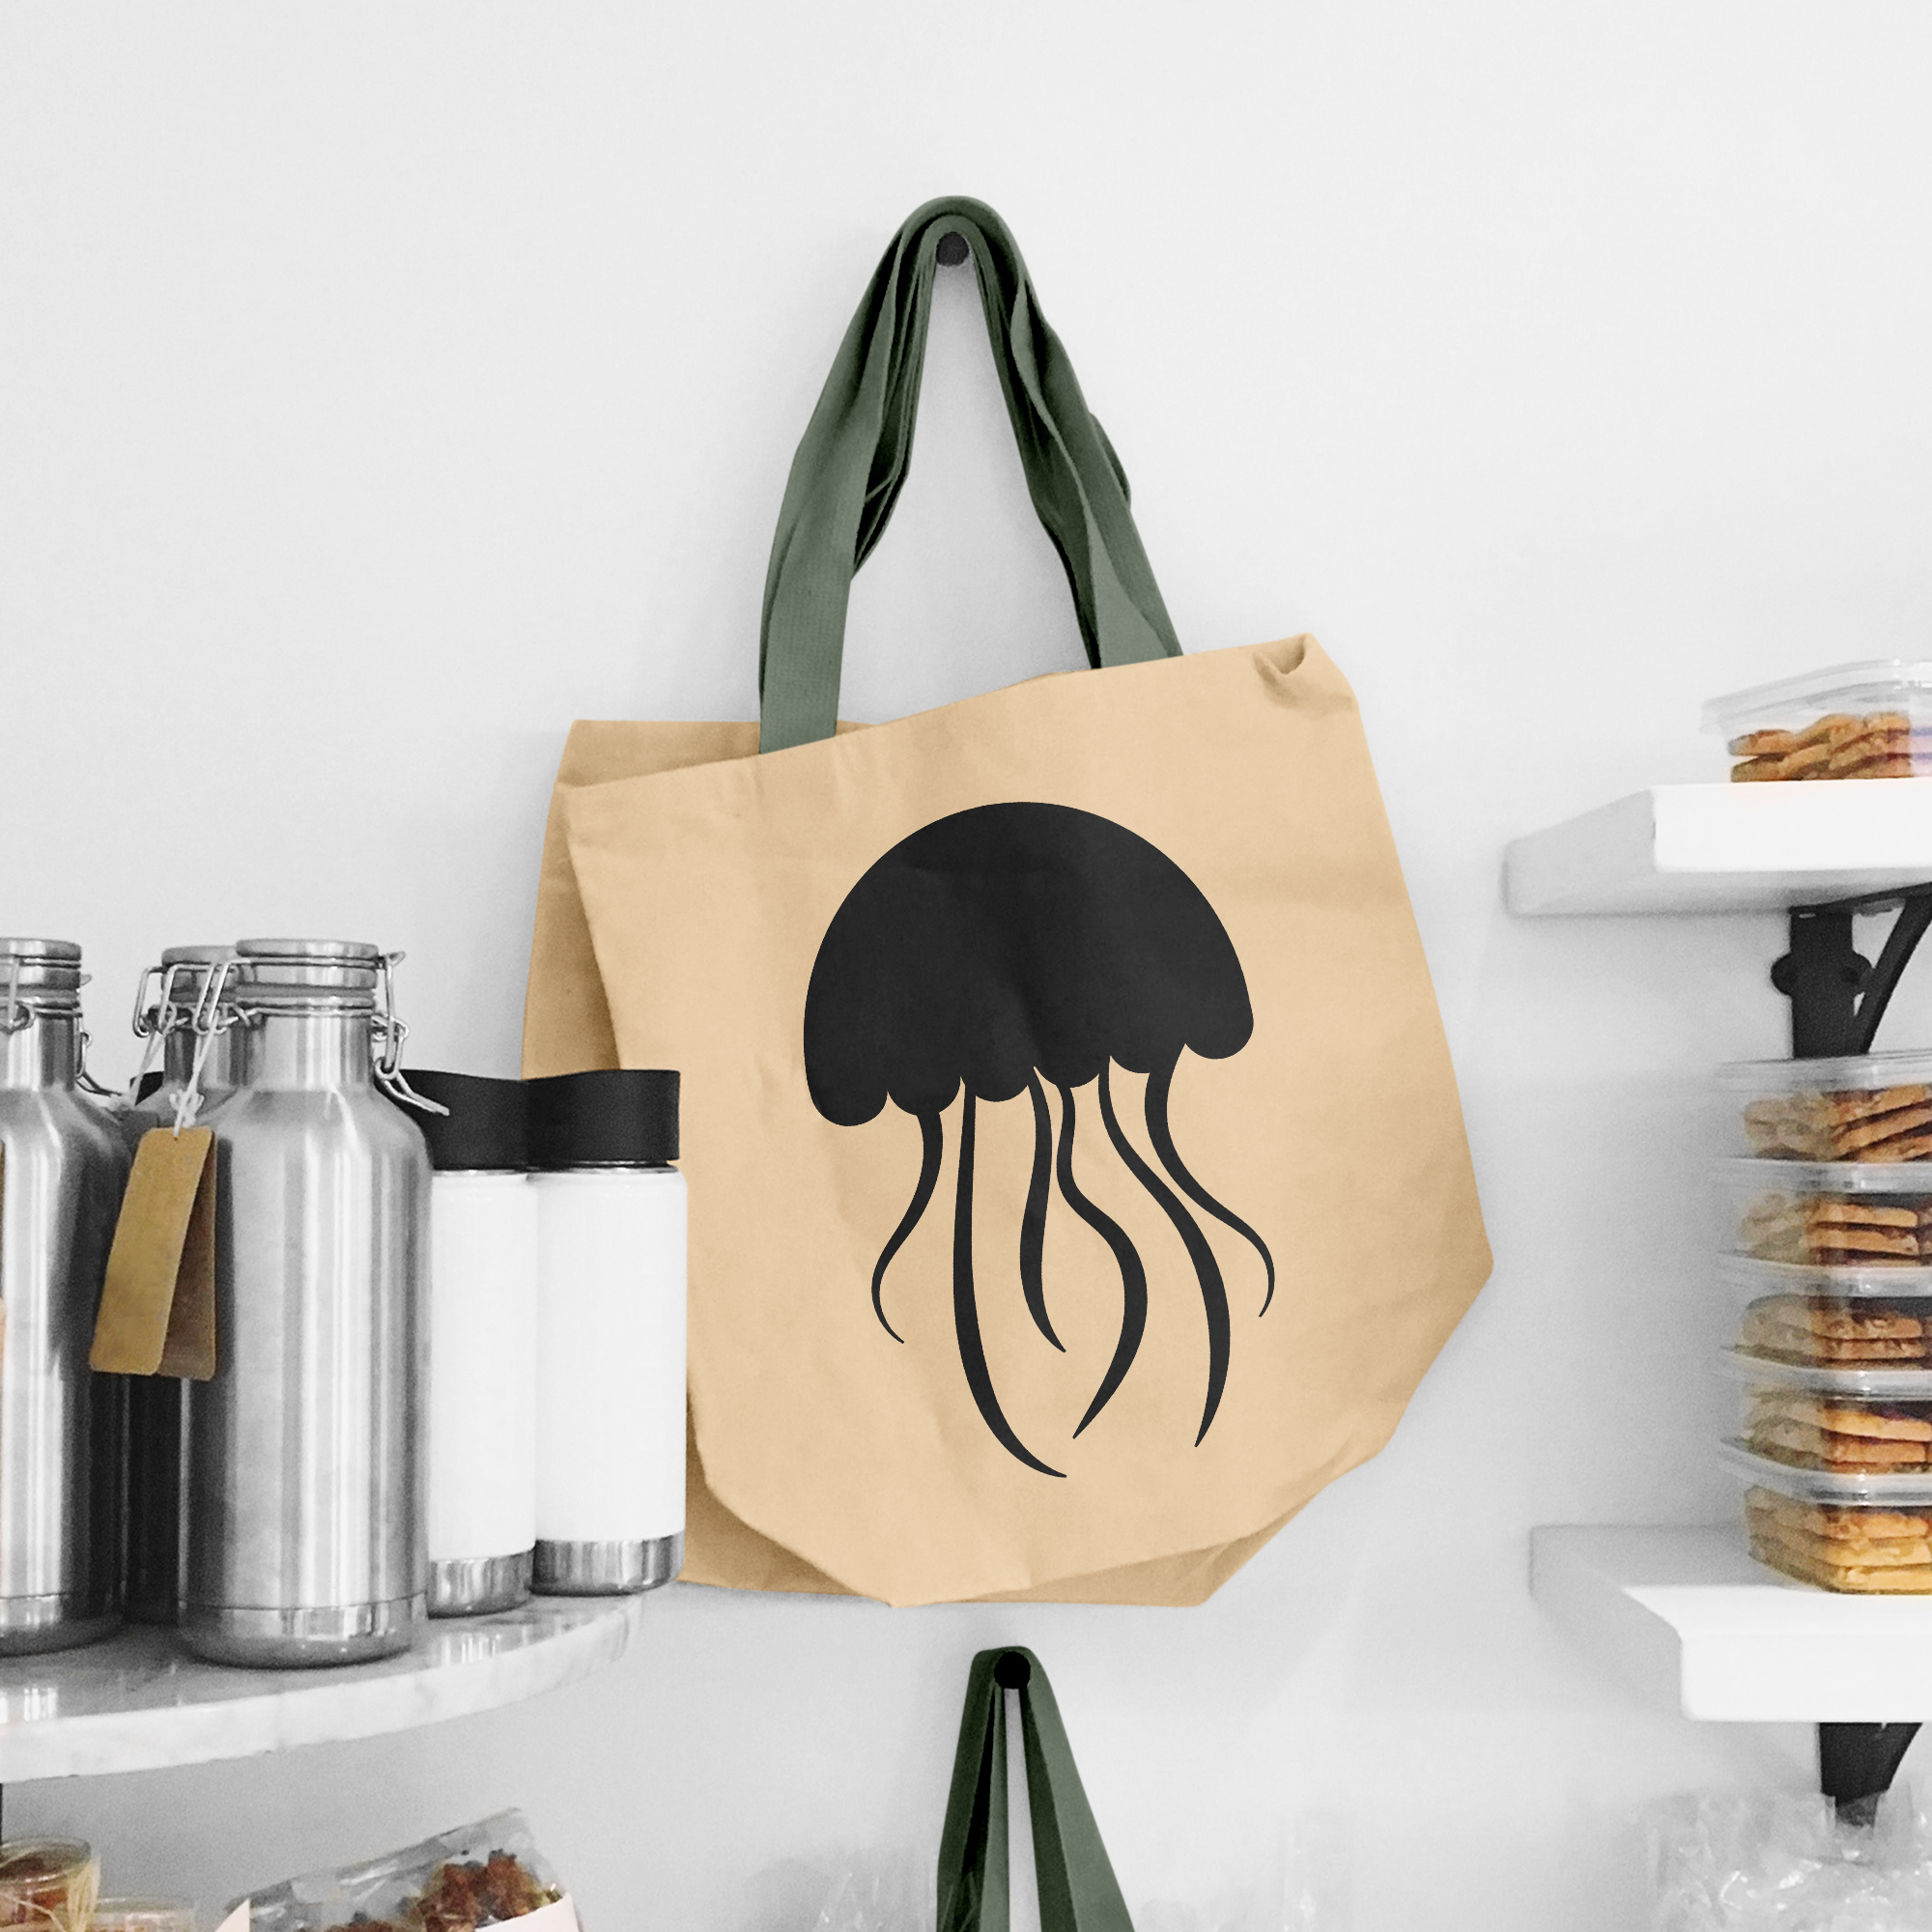 Bag with a picture of a jellyfish on it.